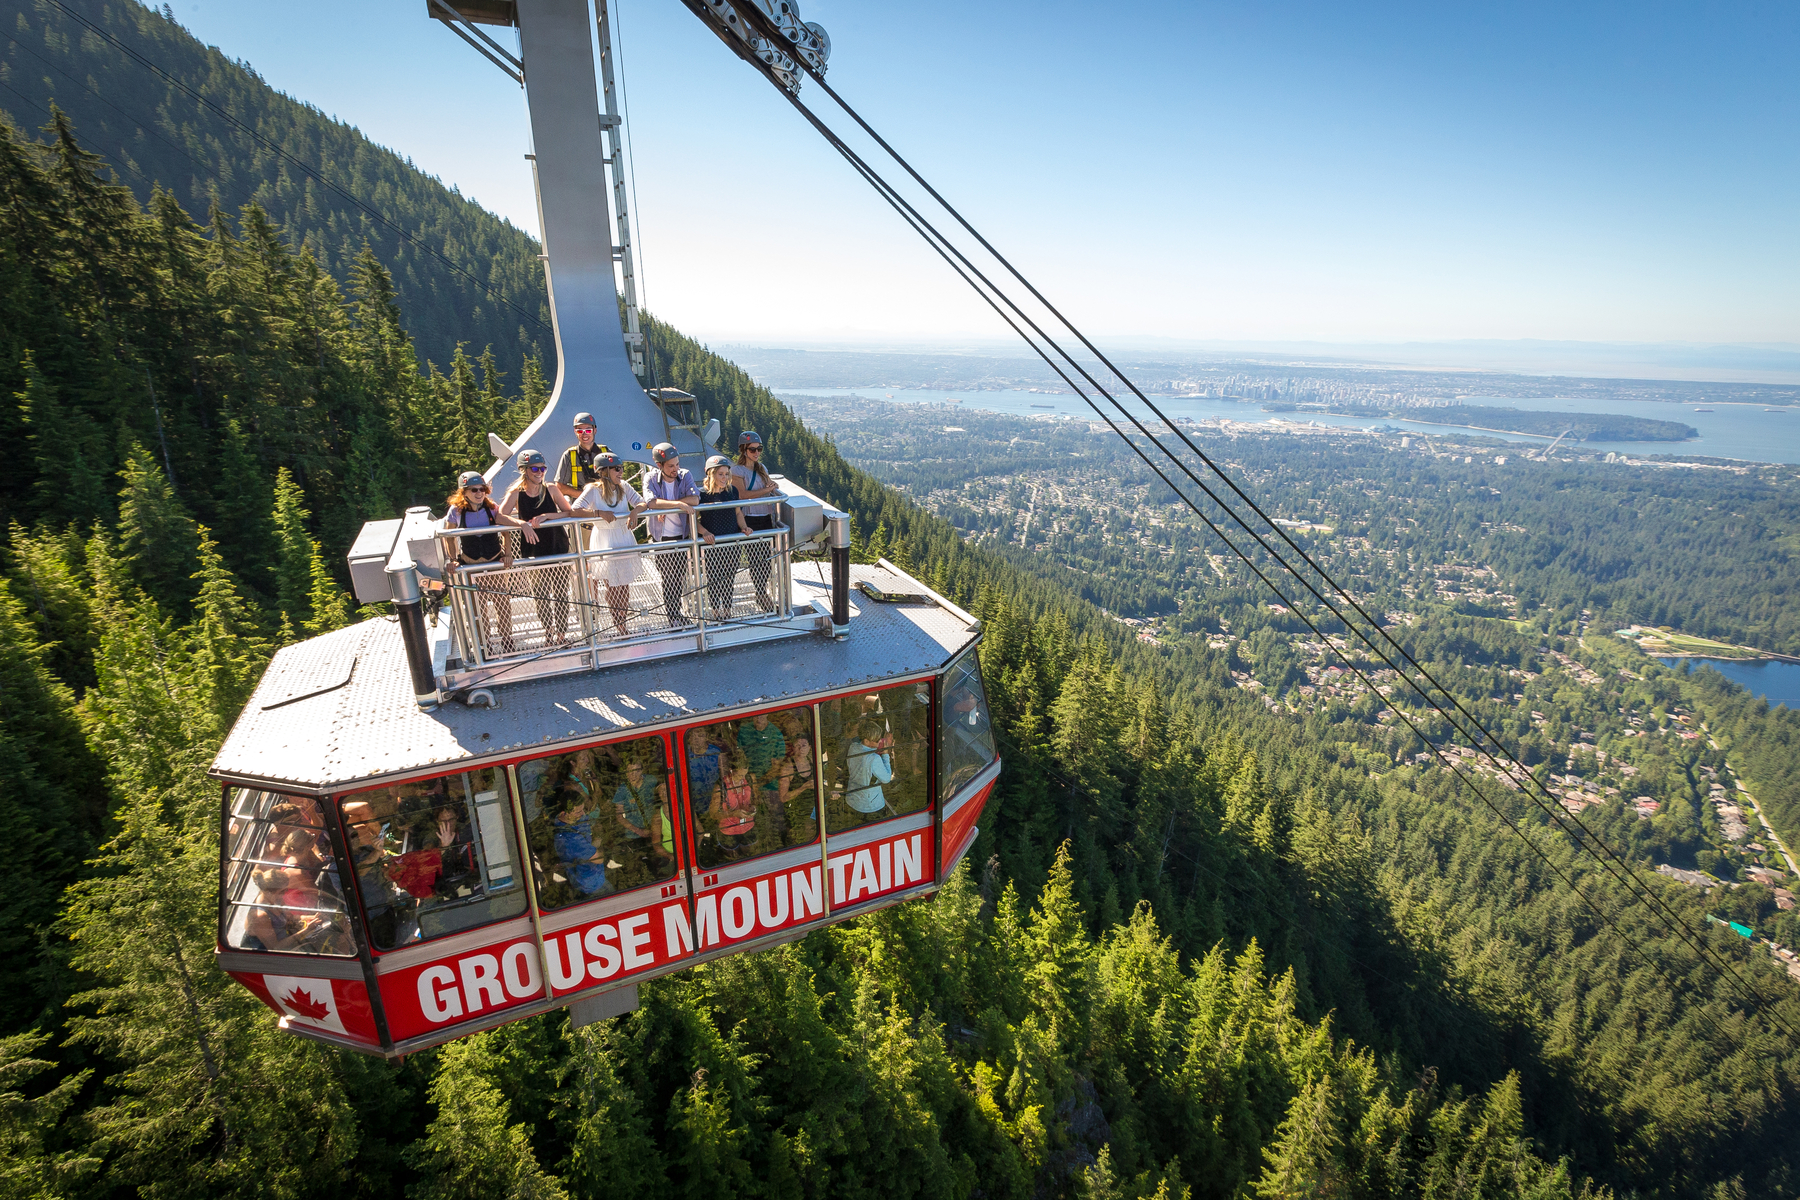 15 Fun Outdoor Activities in Vancouver You Need to Try